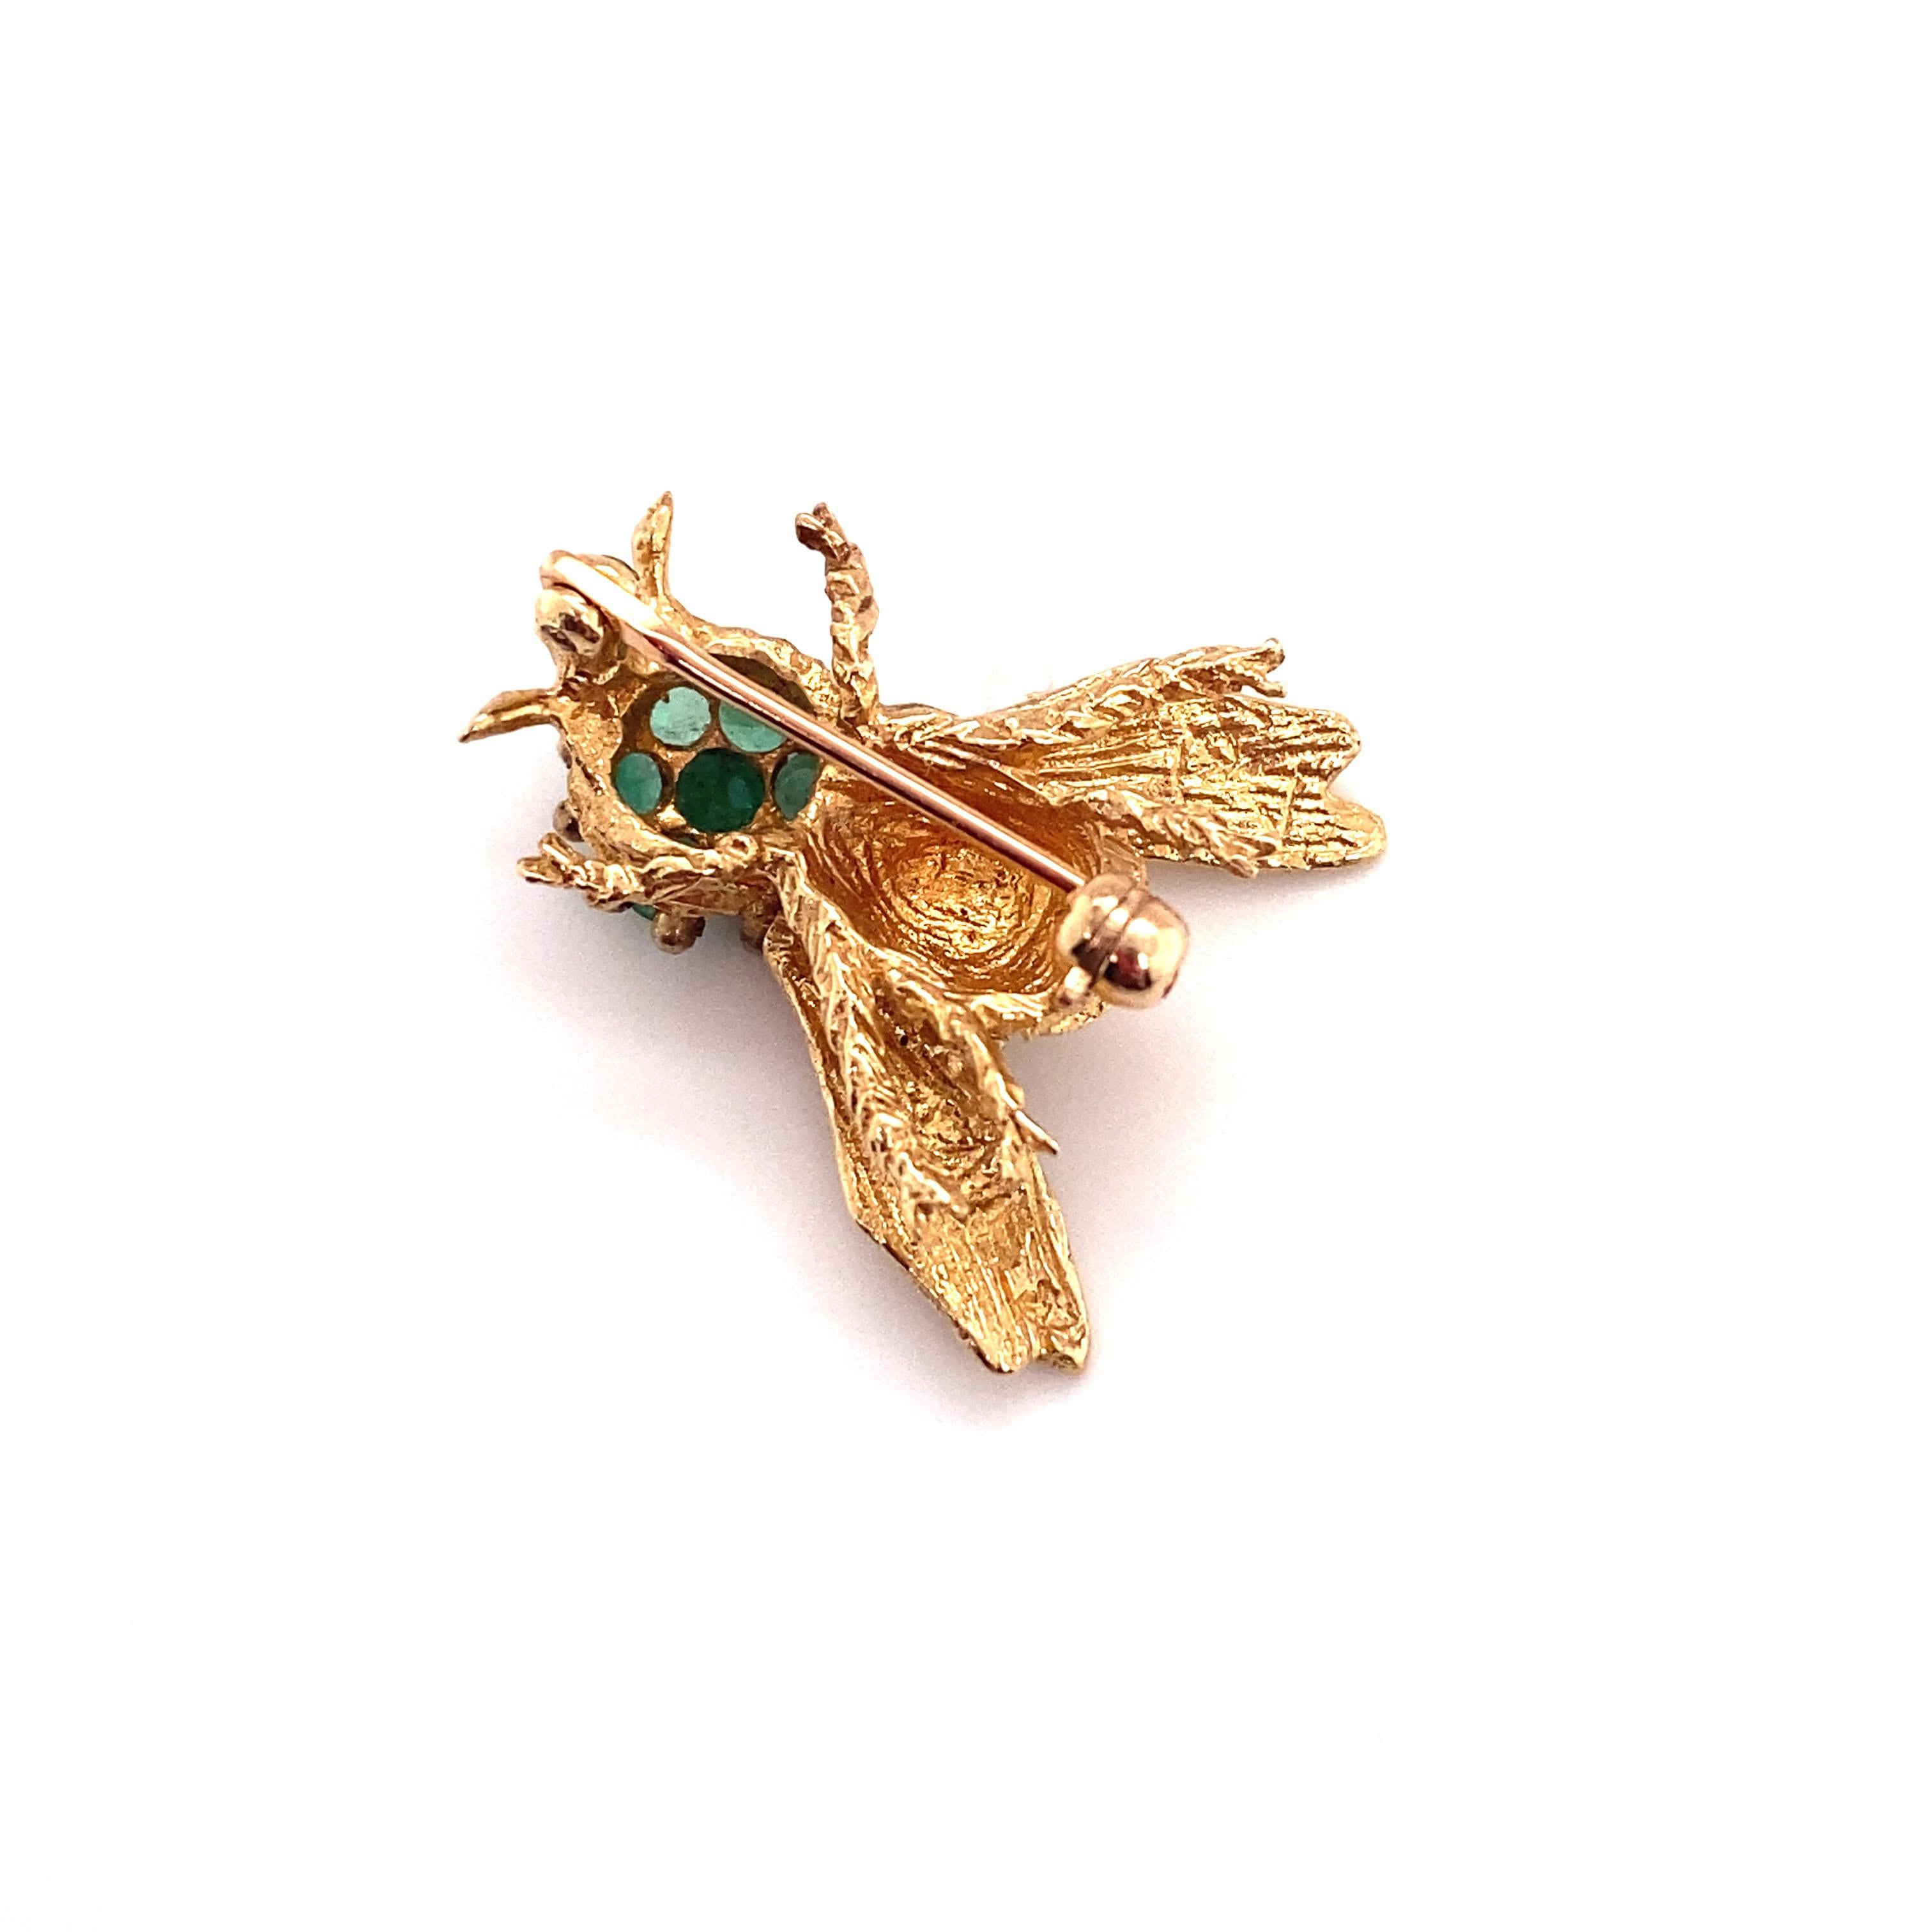 Circa: 1970s
Metal Type: 14 karat yellow gold
Weight: 4.0 grams
Dimensions: 1 inch x 1 inch 

Emerald Details:

Carat: 0.50 carat total weight
Shape: Round
Color: Forest green
